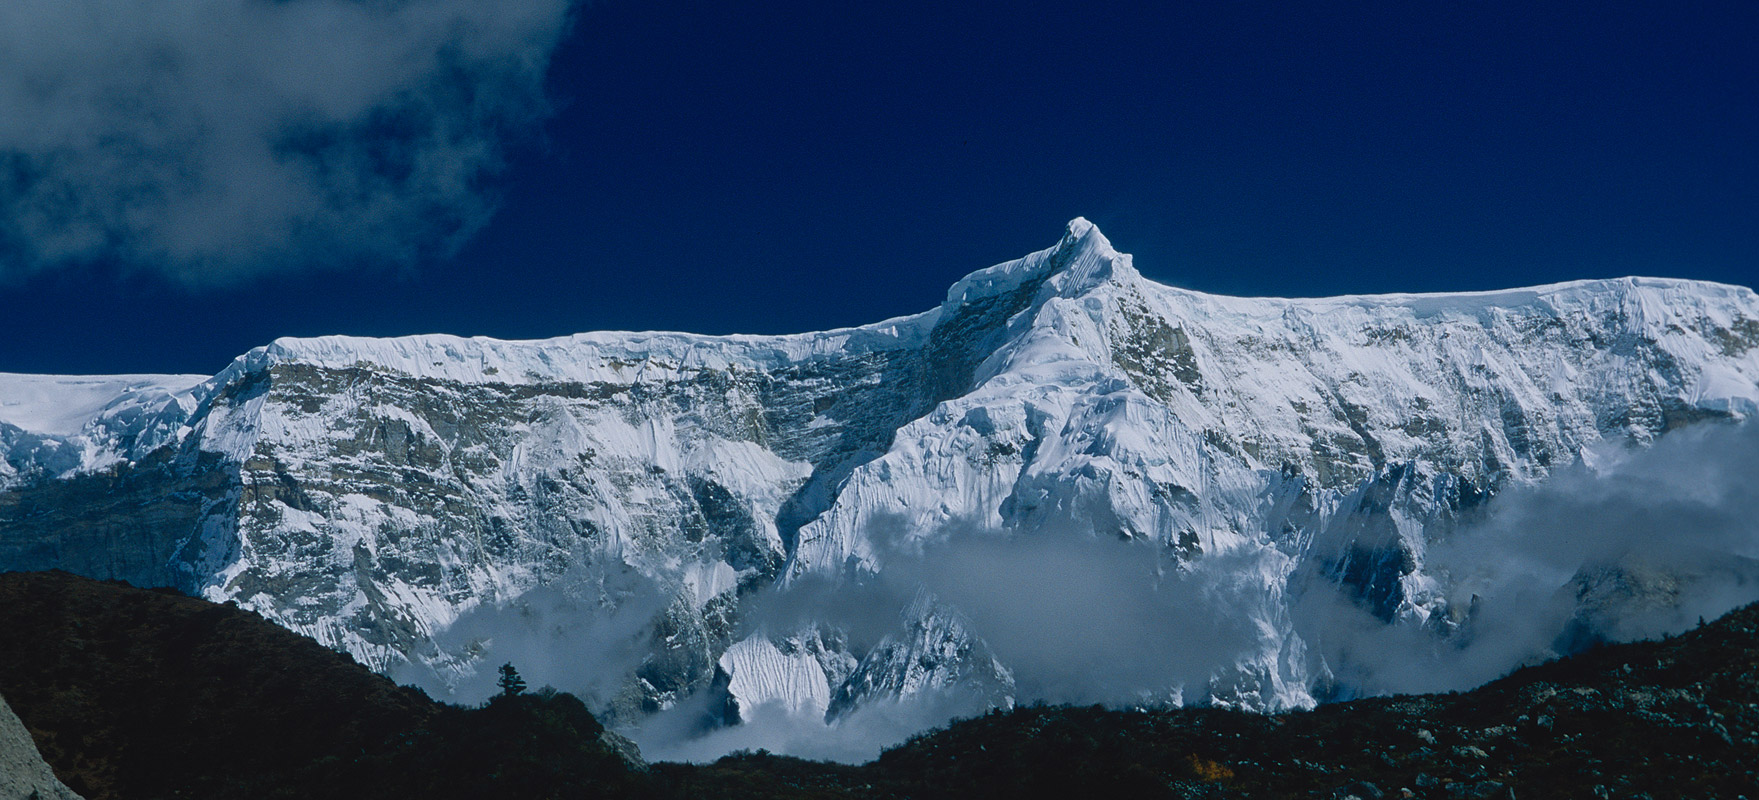 This vast 7000m peak forms the backdrop to the upper Pho Chhu valley and towers over Chozo and Thanza villages.Bronica ETRSi, 75mm, Fuji Velvia